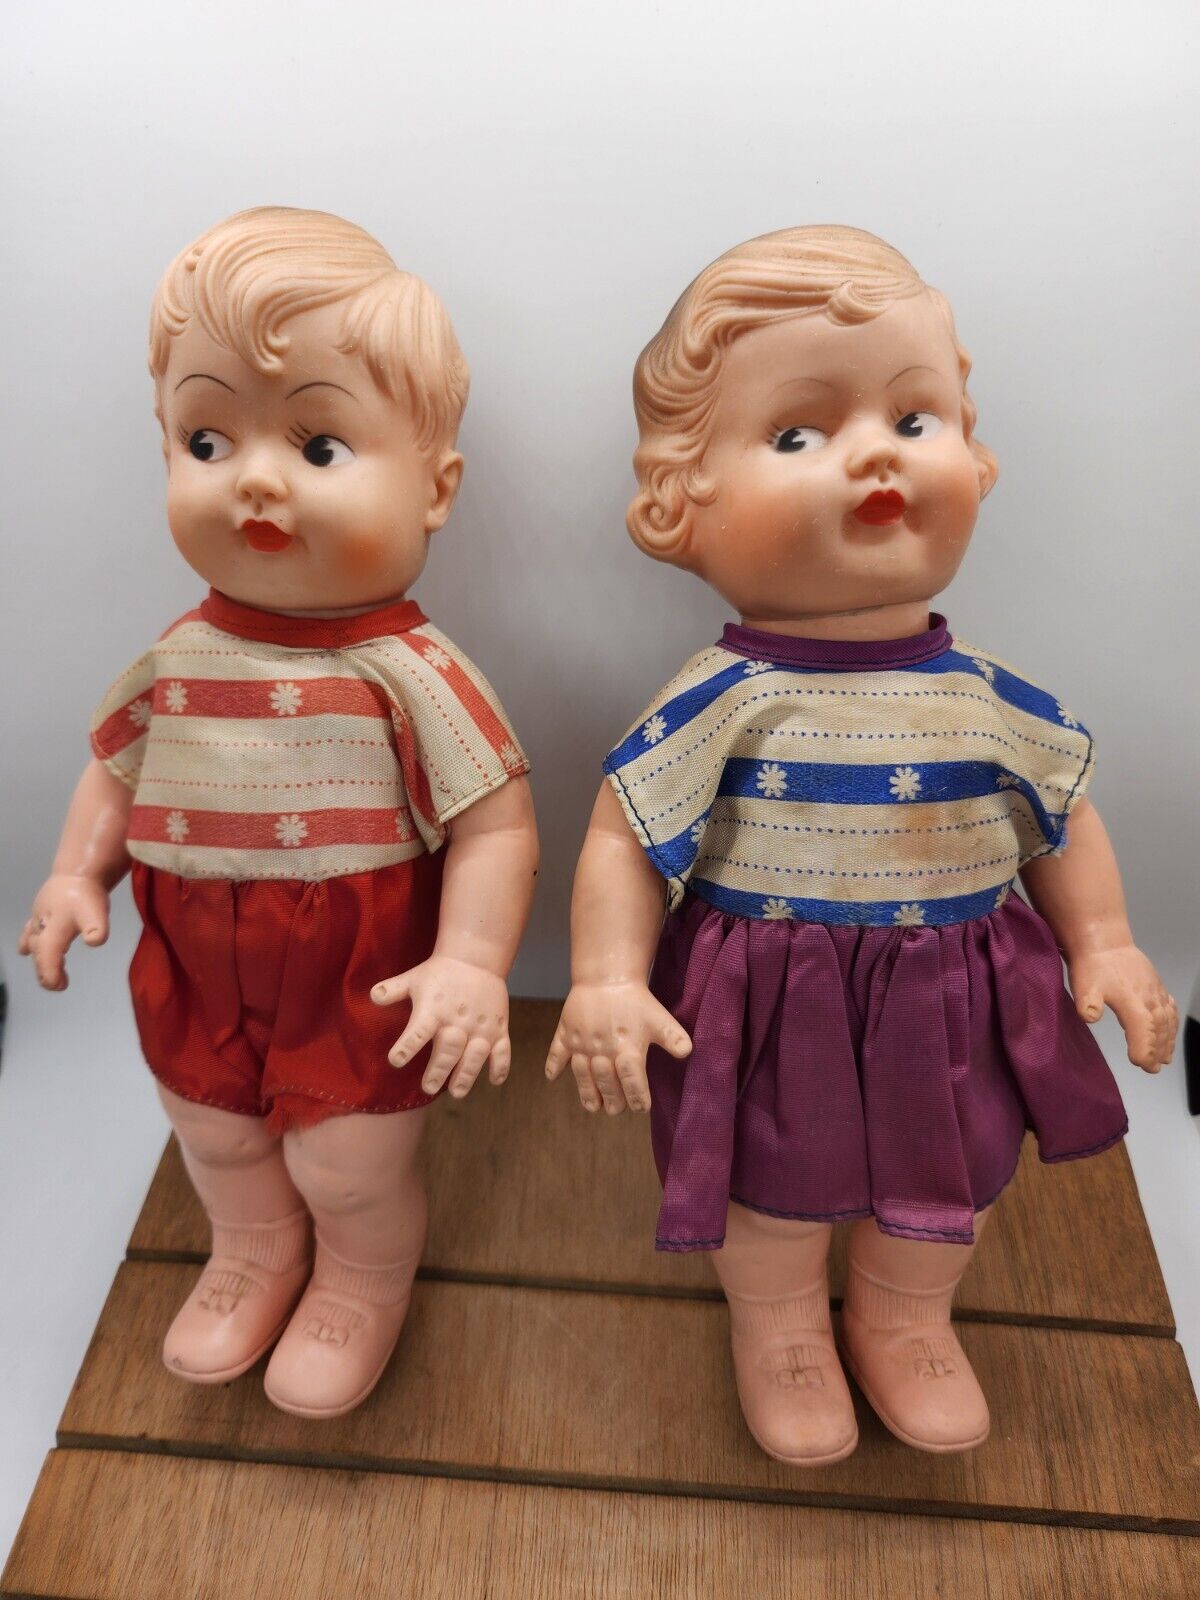 10” - Vintage Soft Rubber Head Dolls - See Photos For Size And Flaws